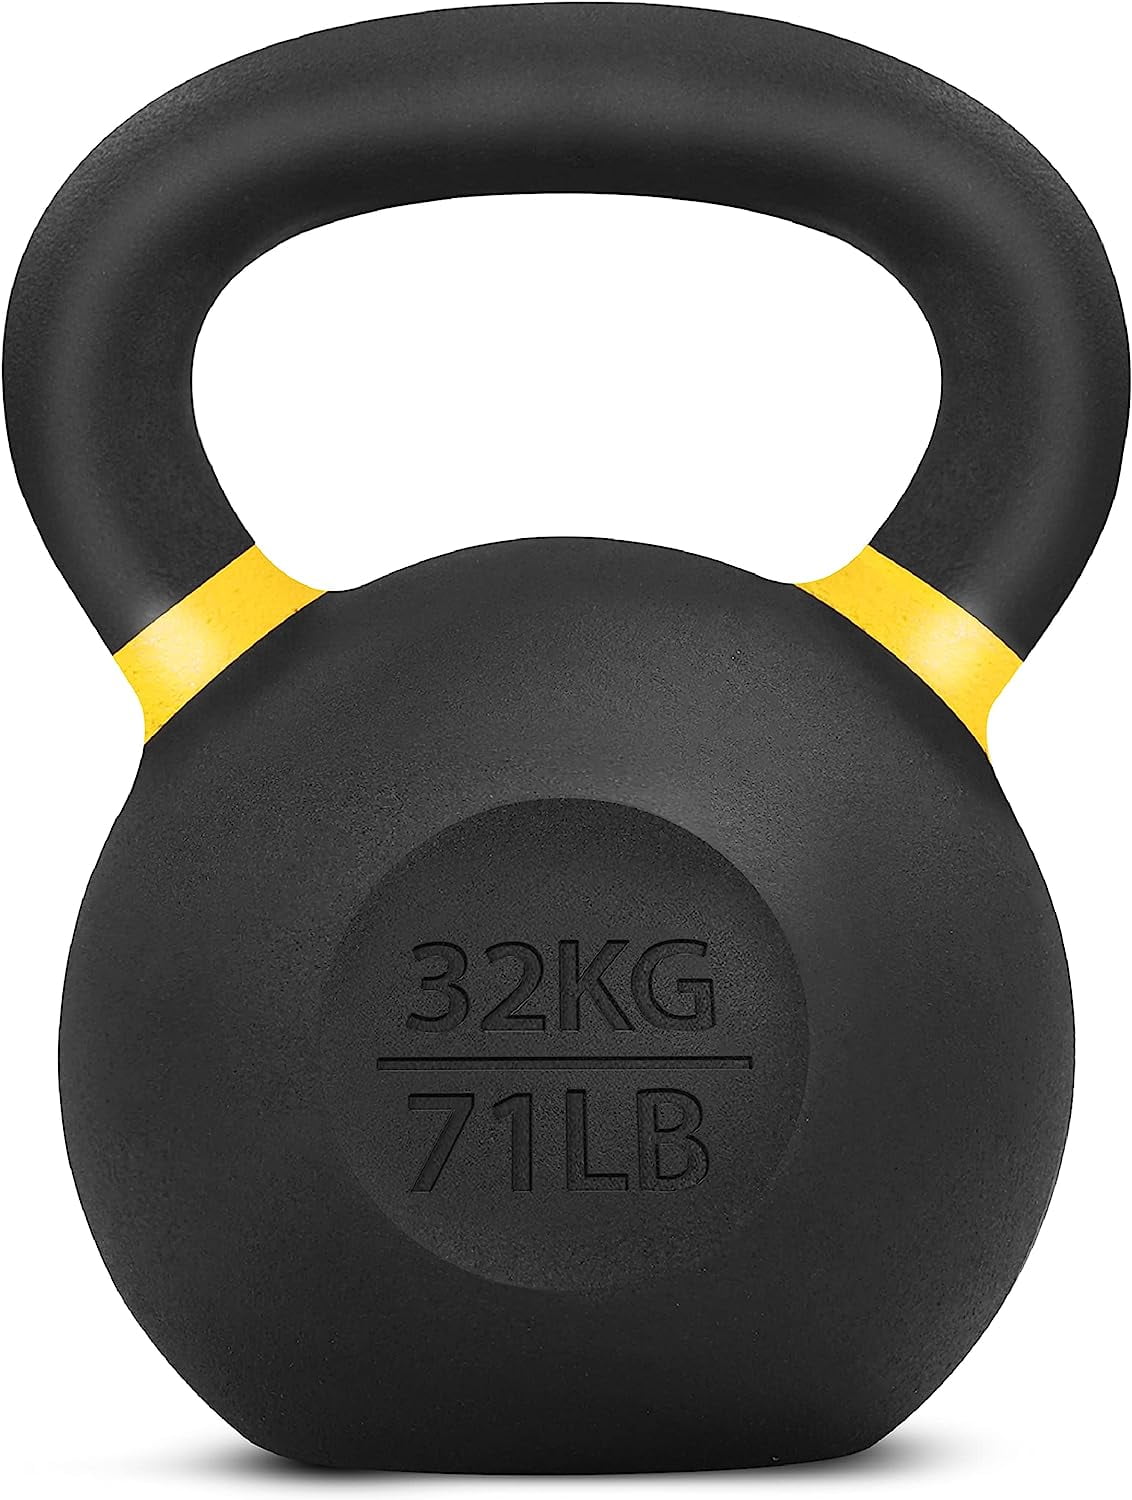 UFC Kettlebell 12kg, Red Red Rubber Coated Iron with Flat Bottom